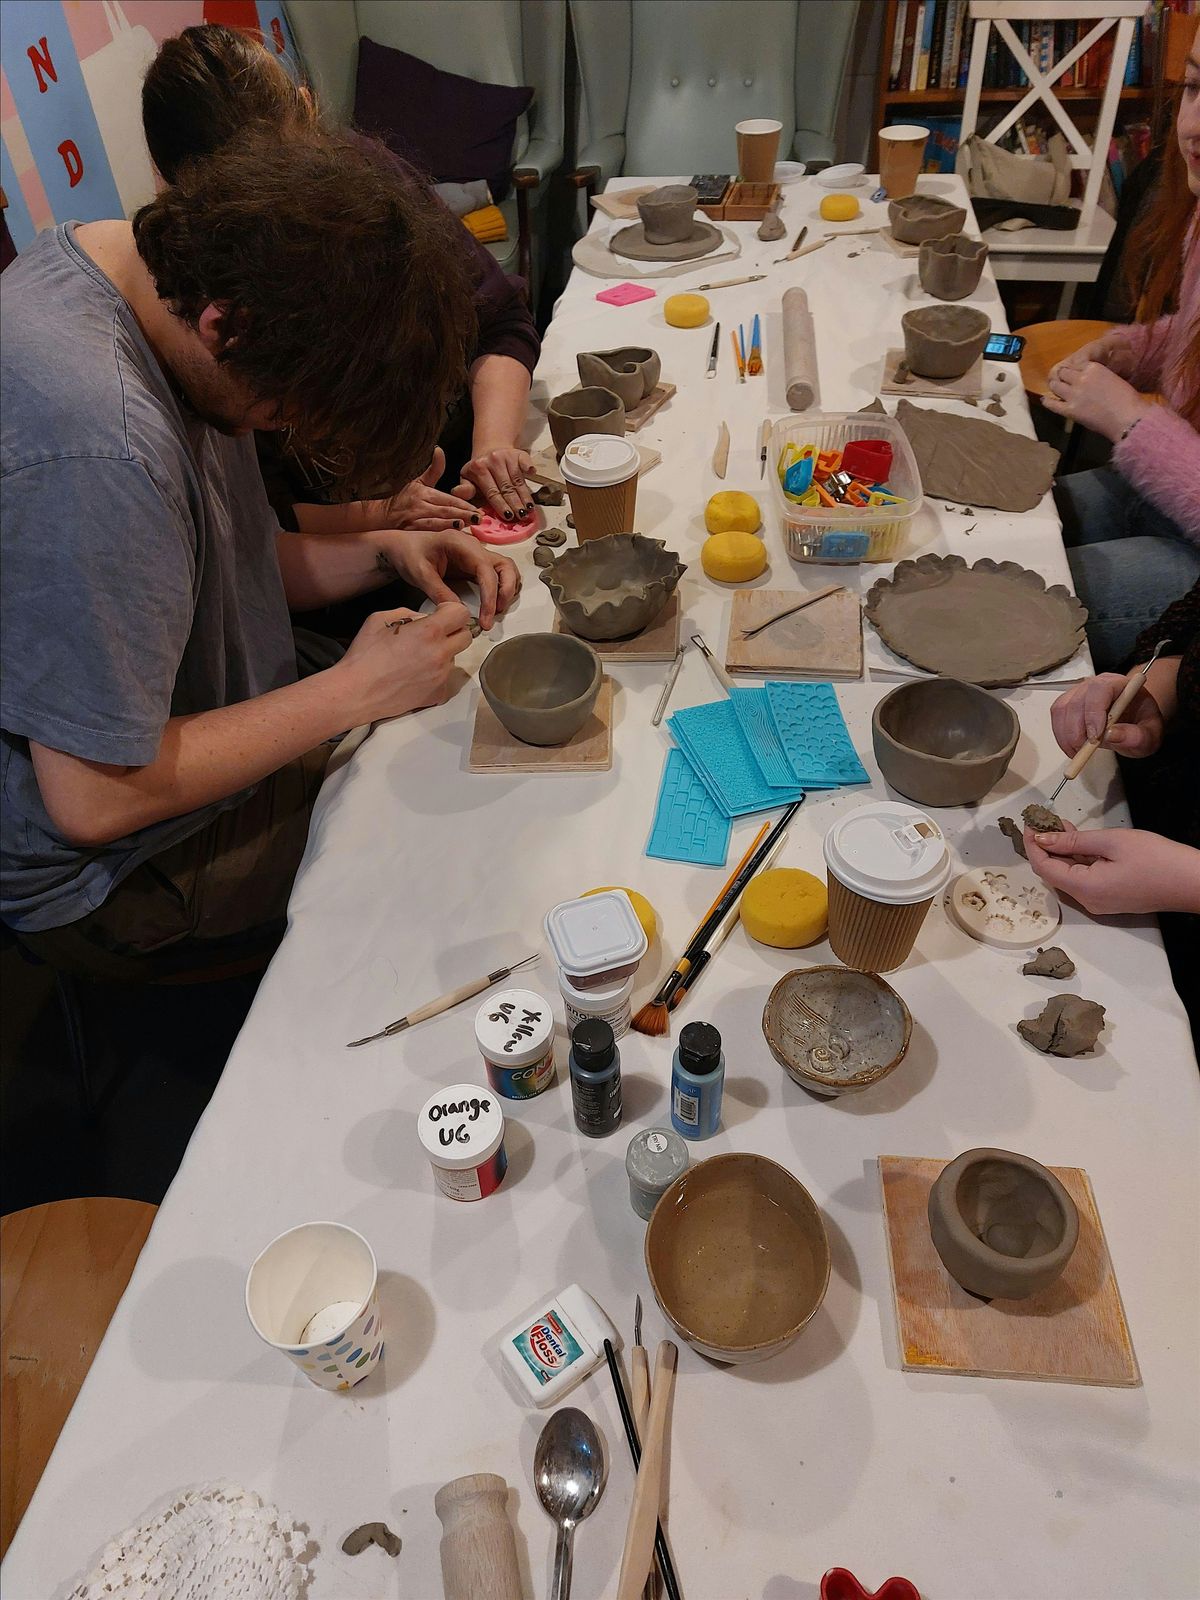 Clay Club - Drop in session